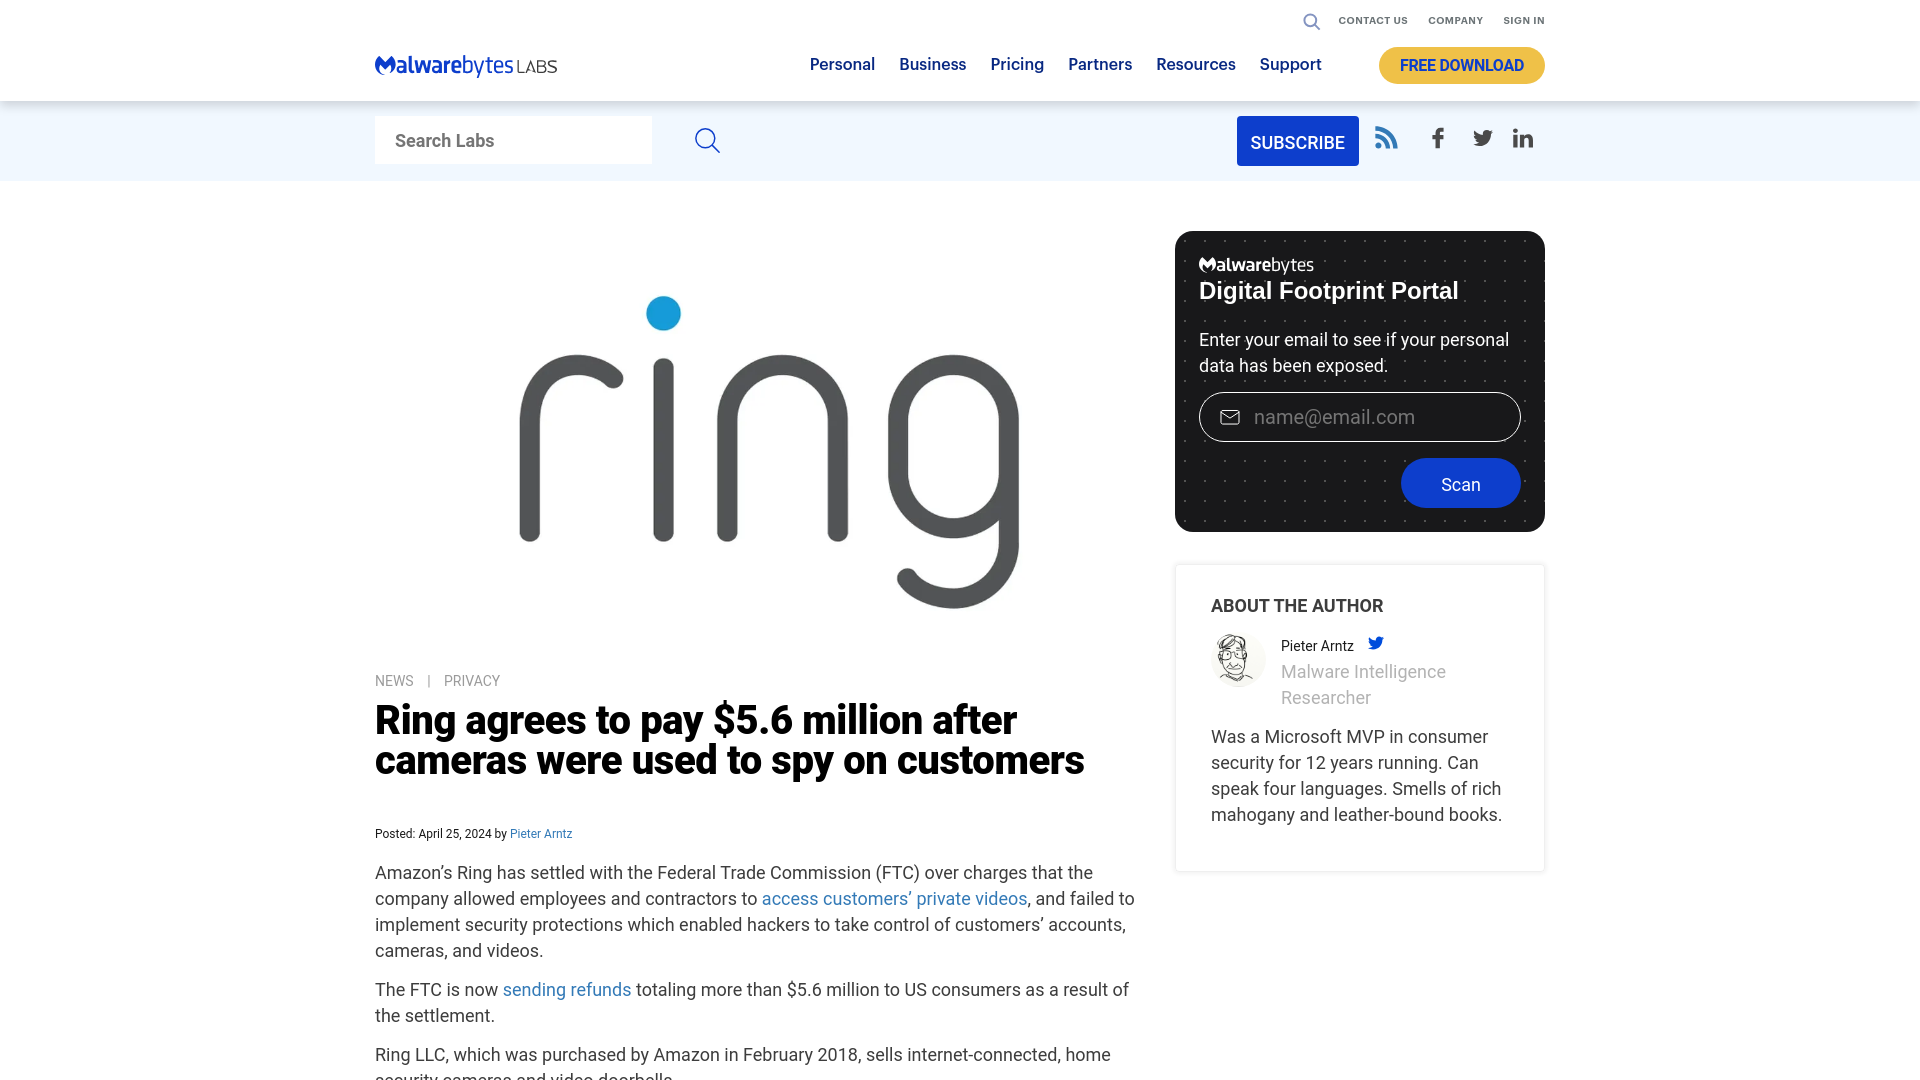 Ring agrees to pay $5.6 million after cameras were used to spy on customers | Malwarebytes